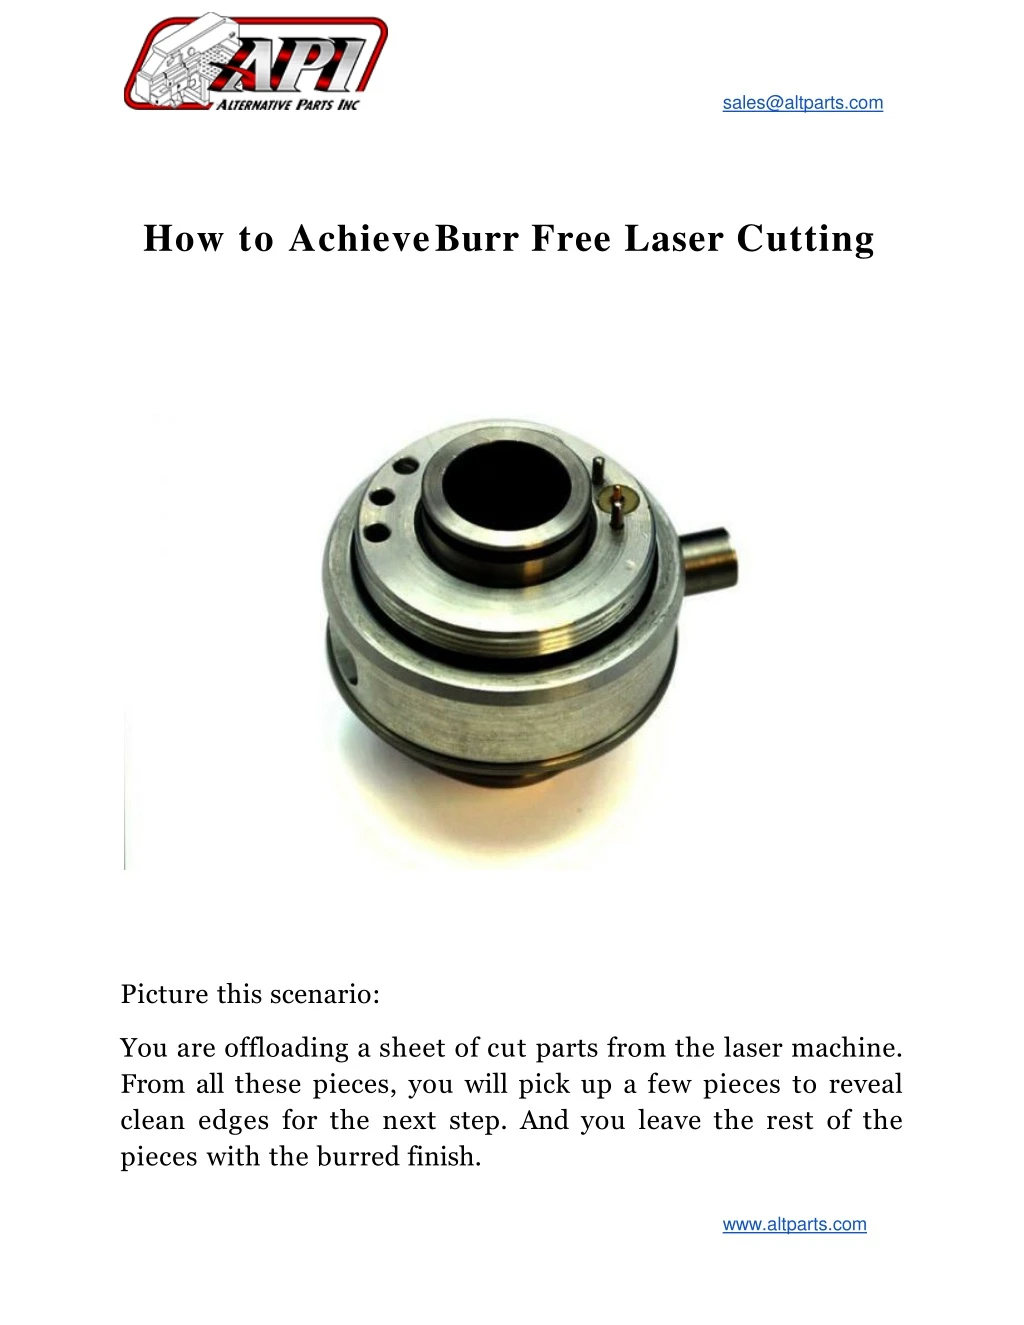 how to achieve burr free laser cutting